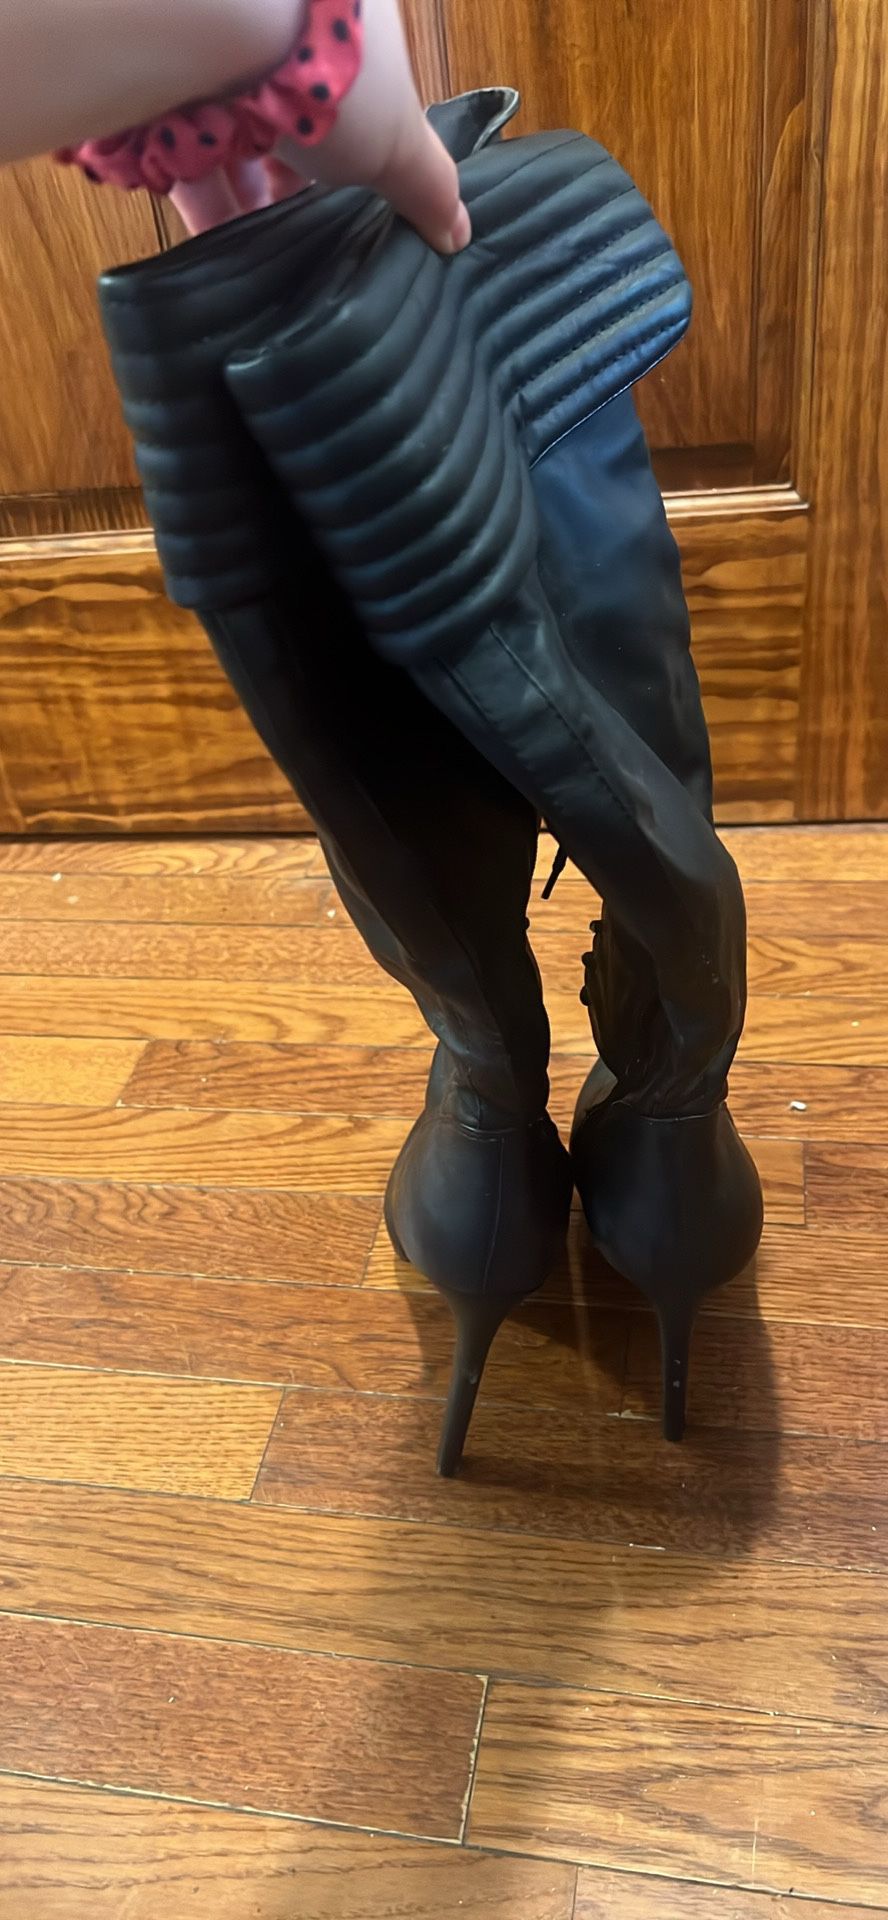 LACE UP STILETTO KNEE HIGH BOOTS